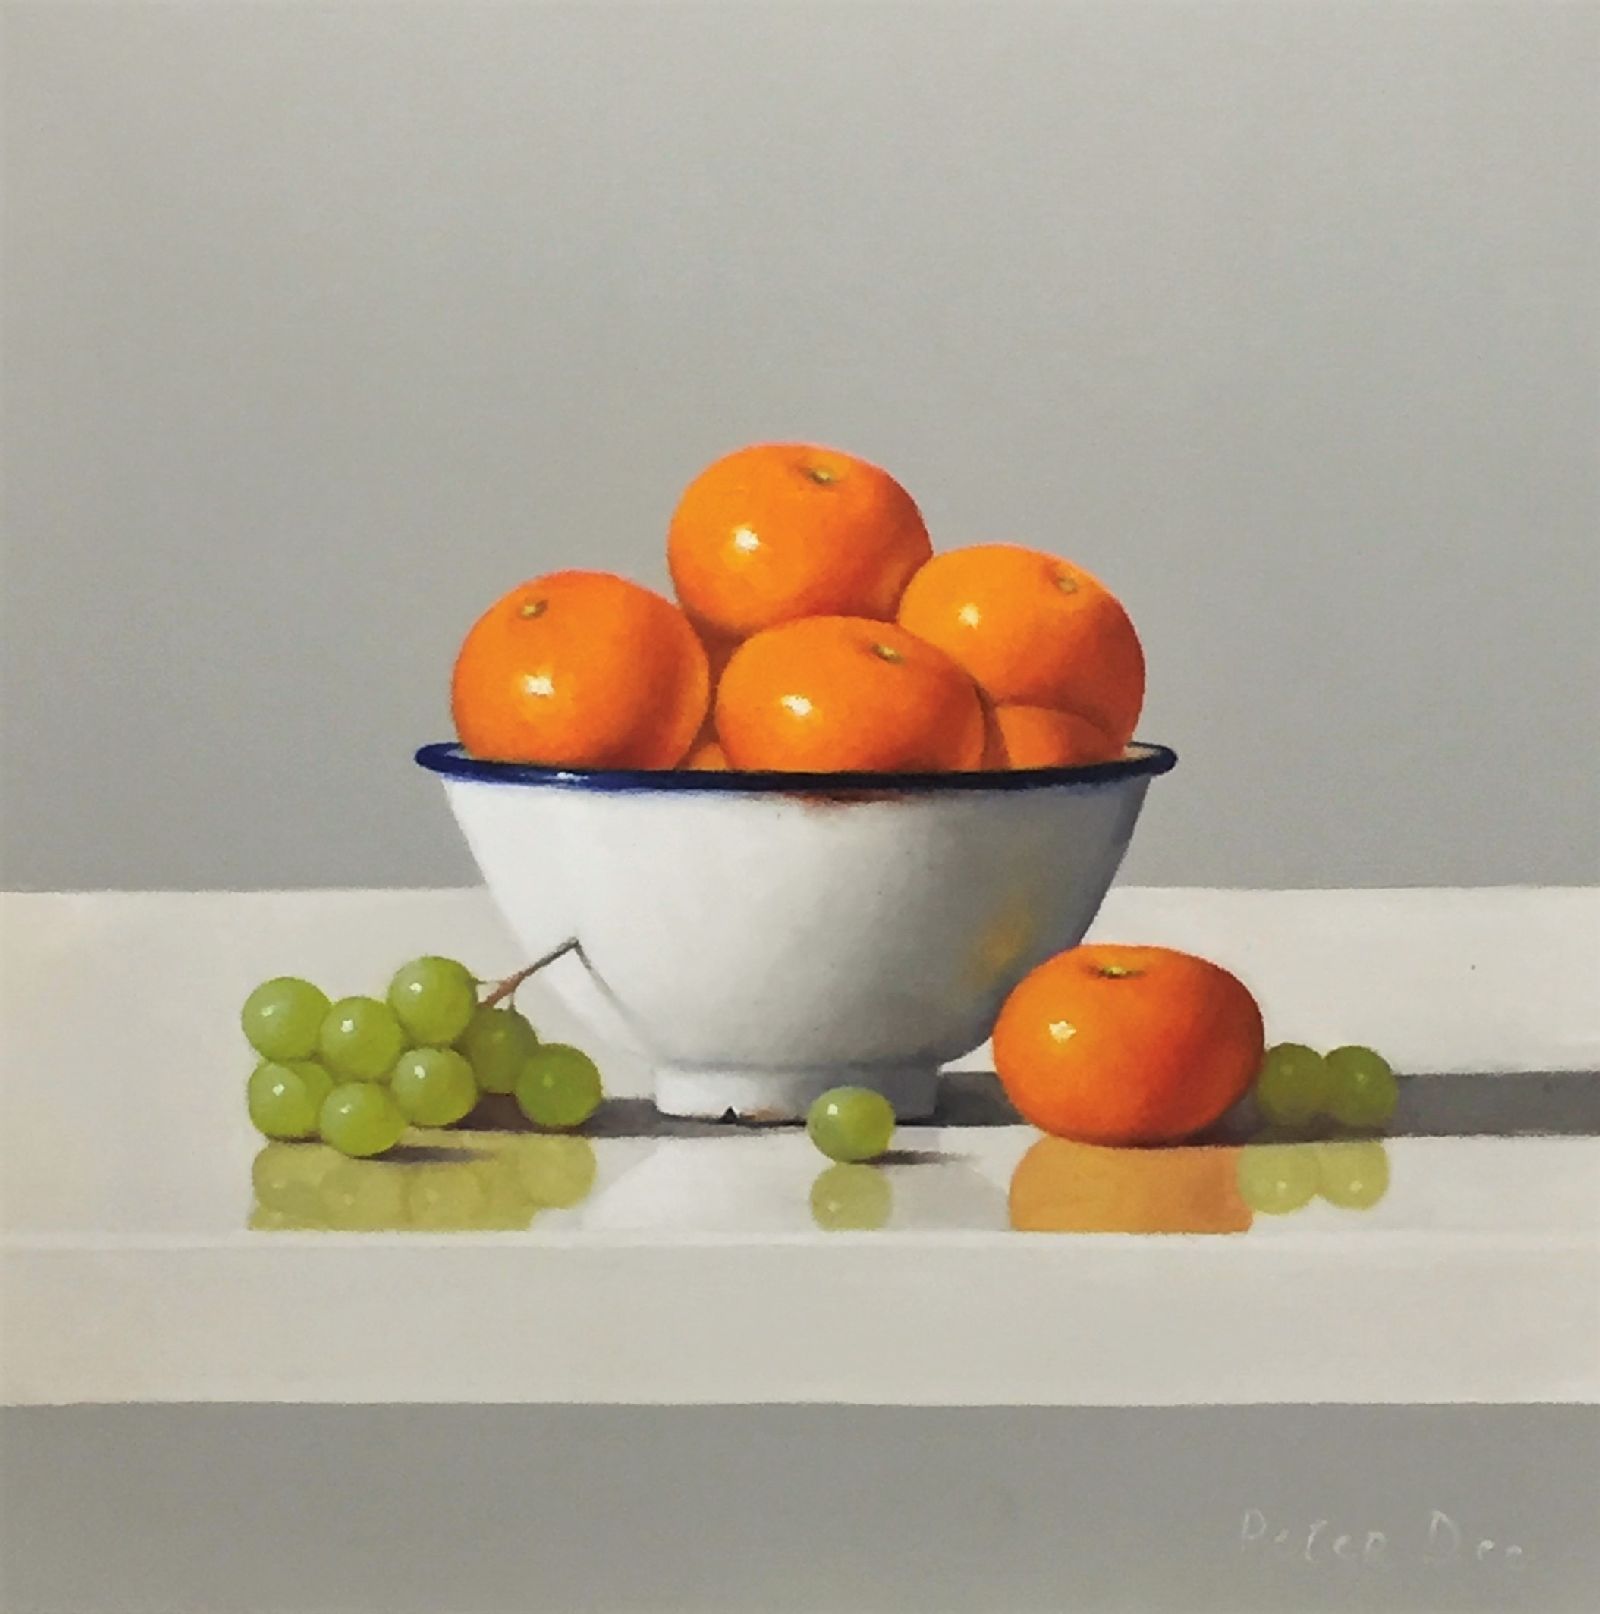 Peter Dee - Bowl of Oranges with Grapes